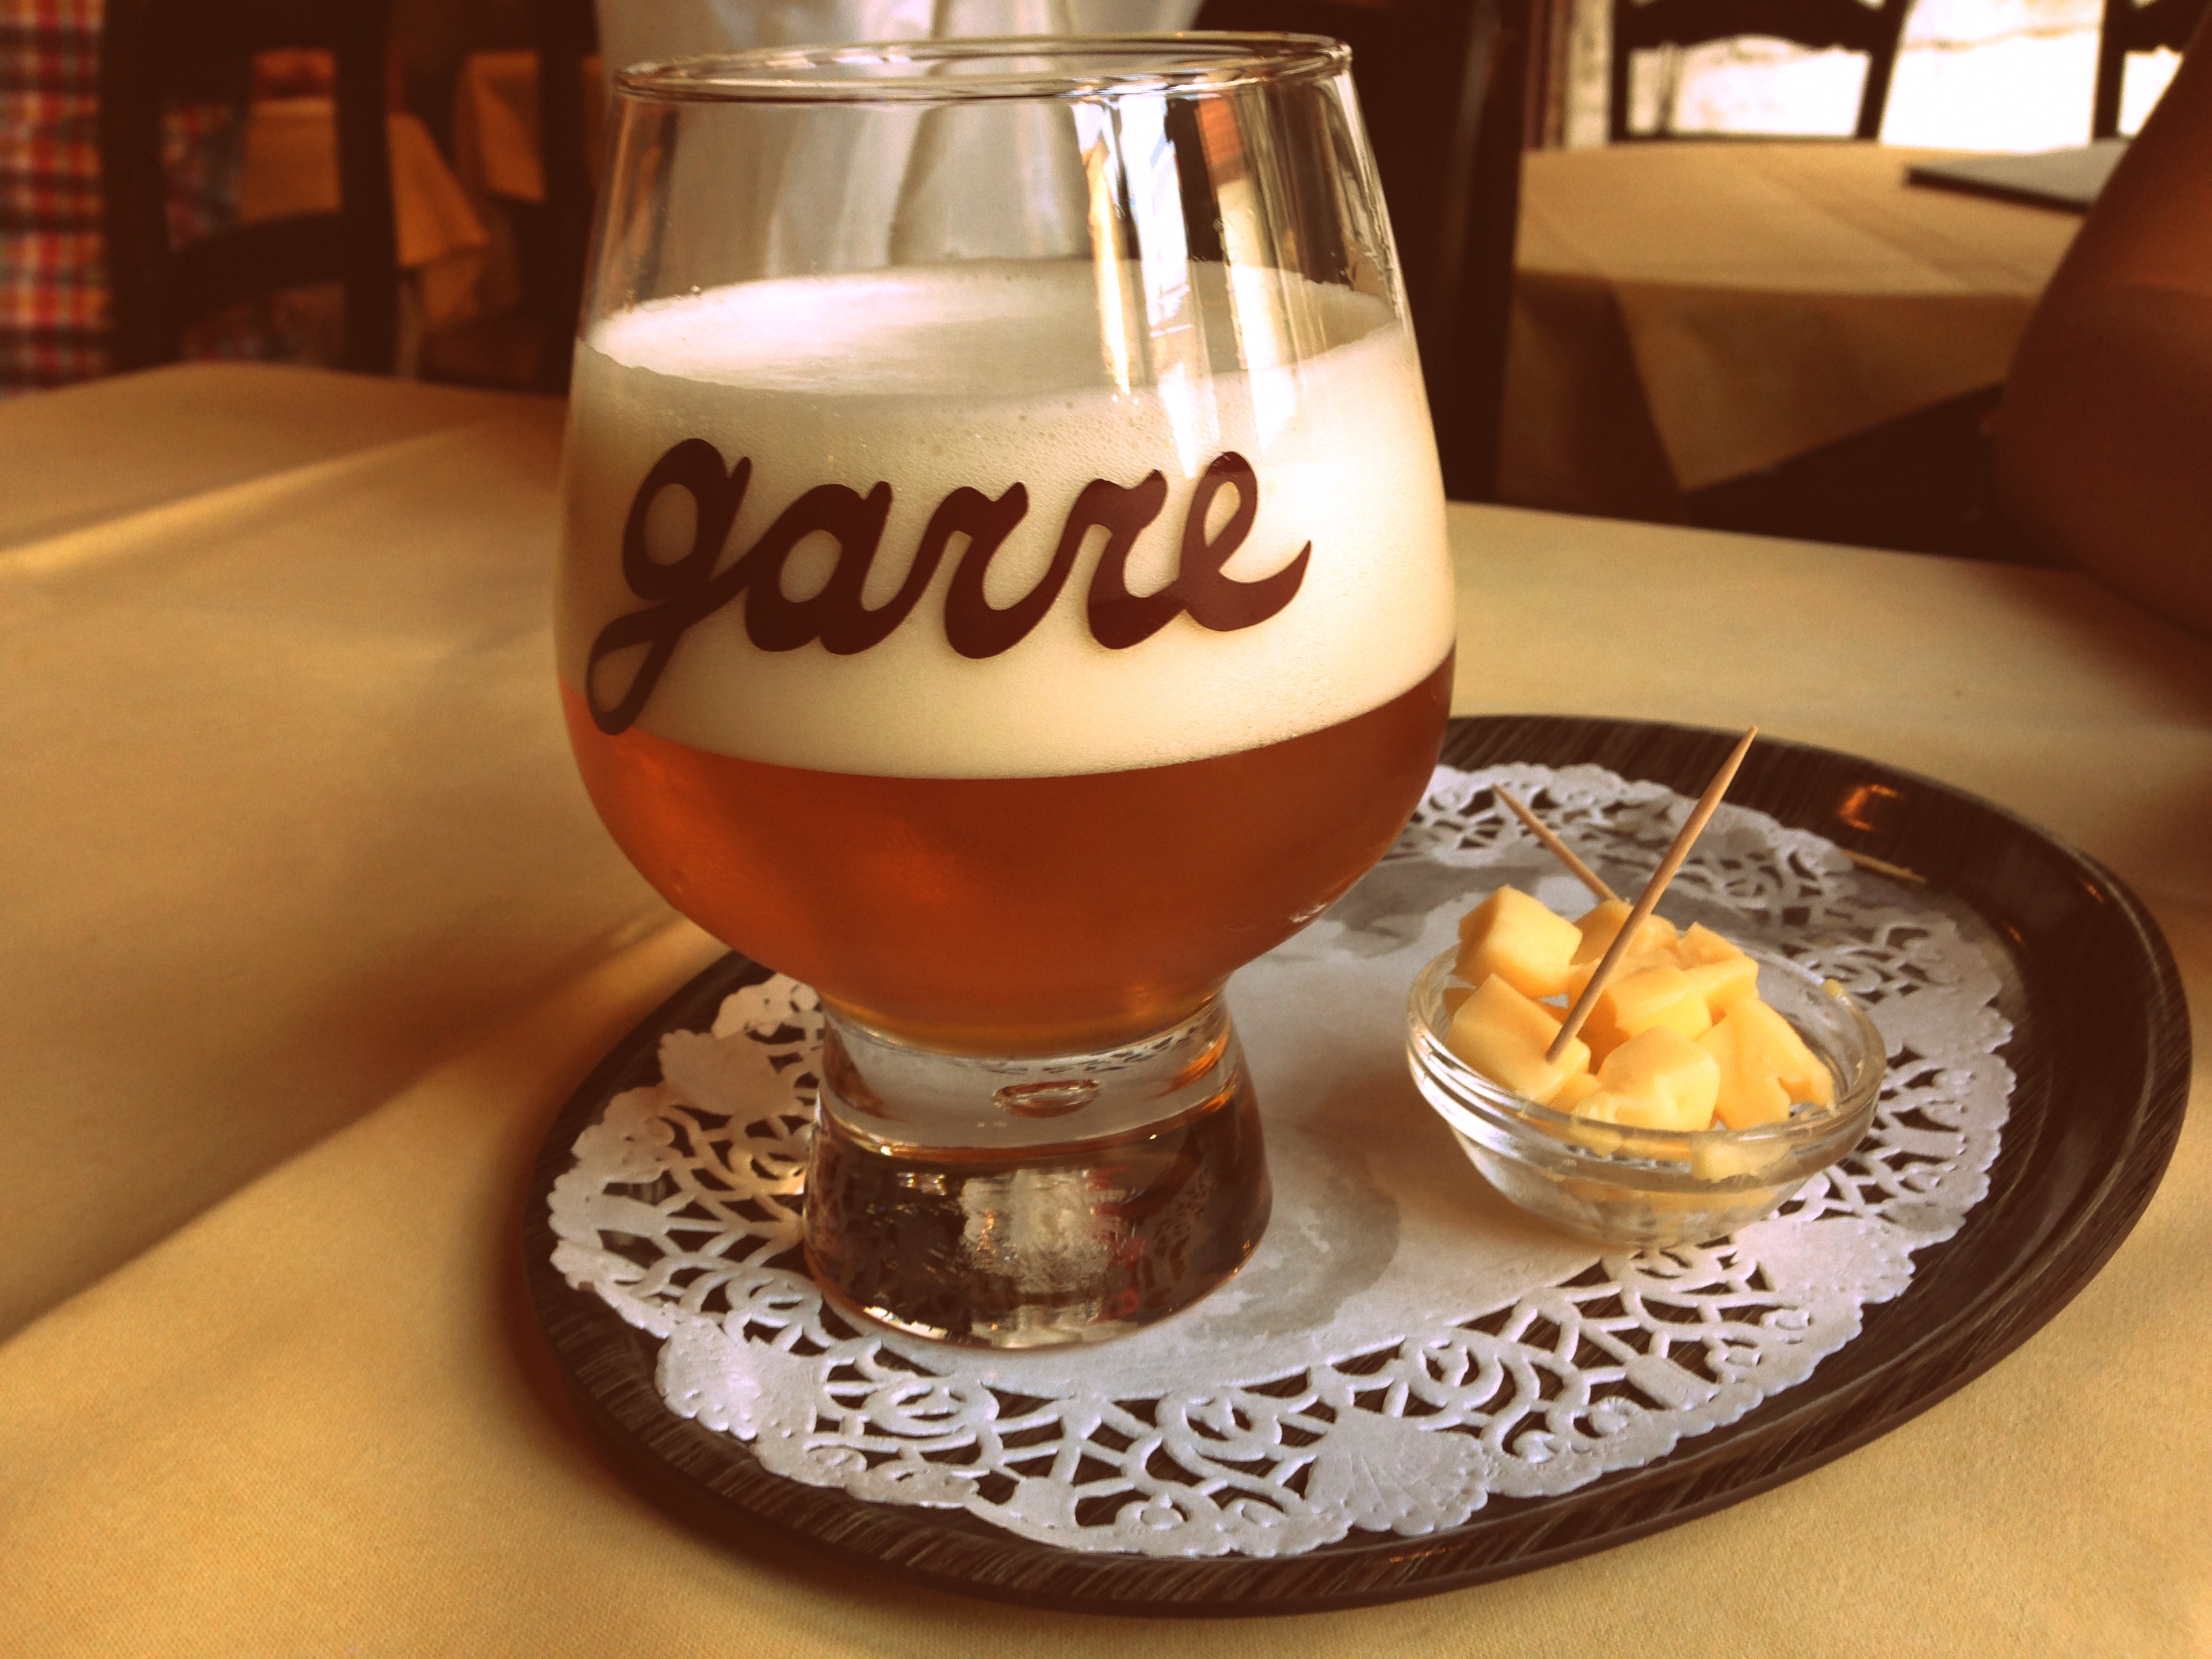 Garre, Bruges (the house bar, which isn't just found in Bruges, it's only found at this one bar--it was my second favorite)